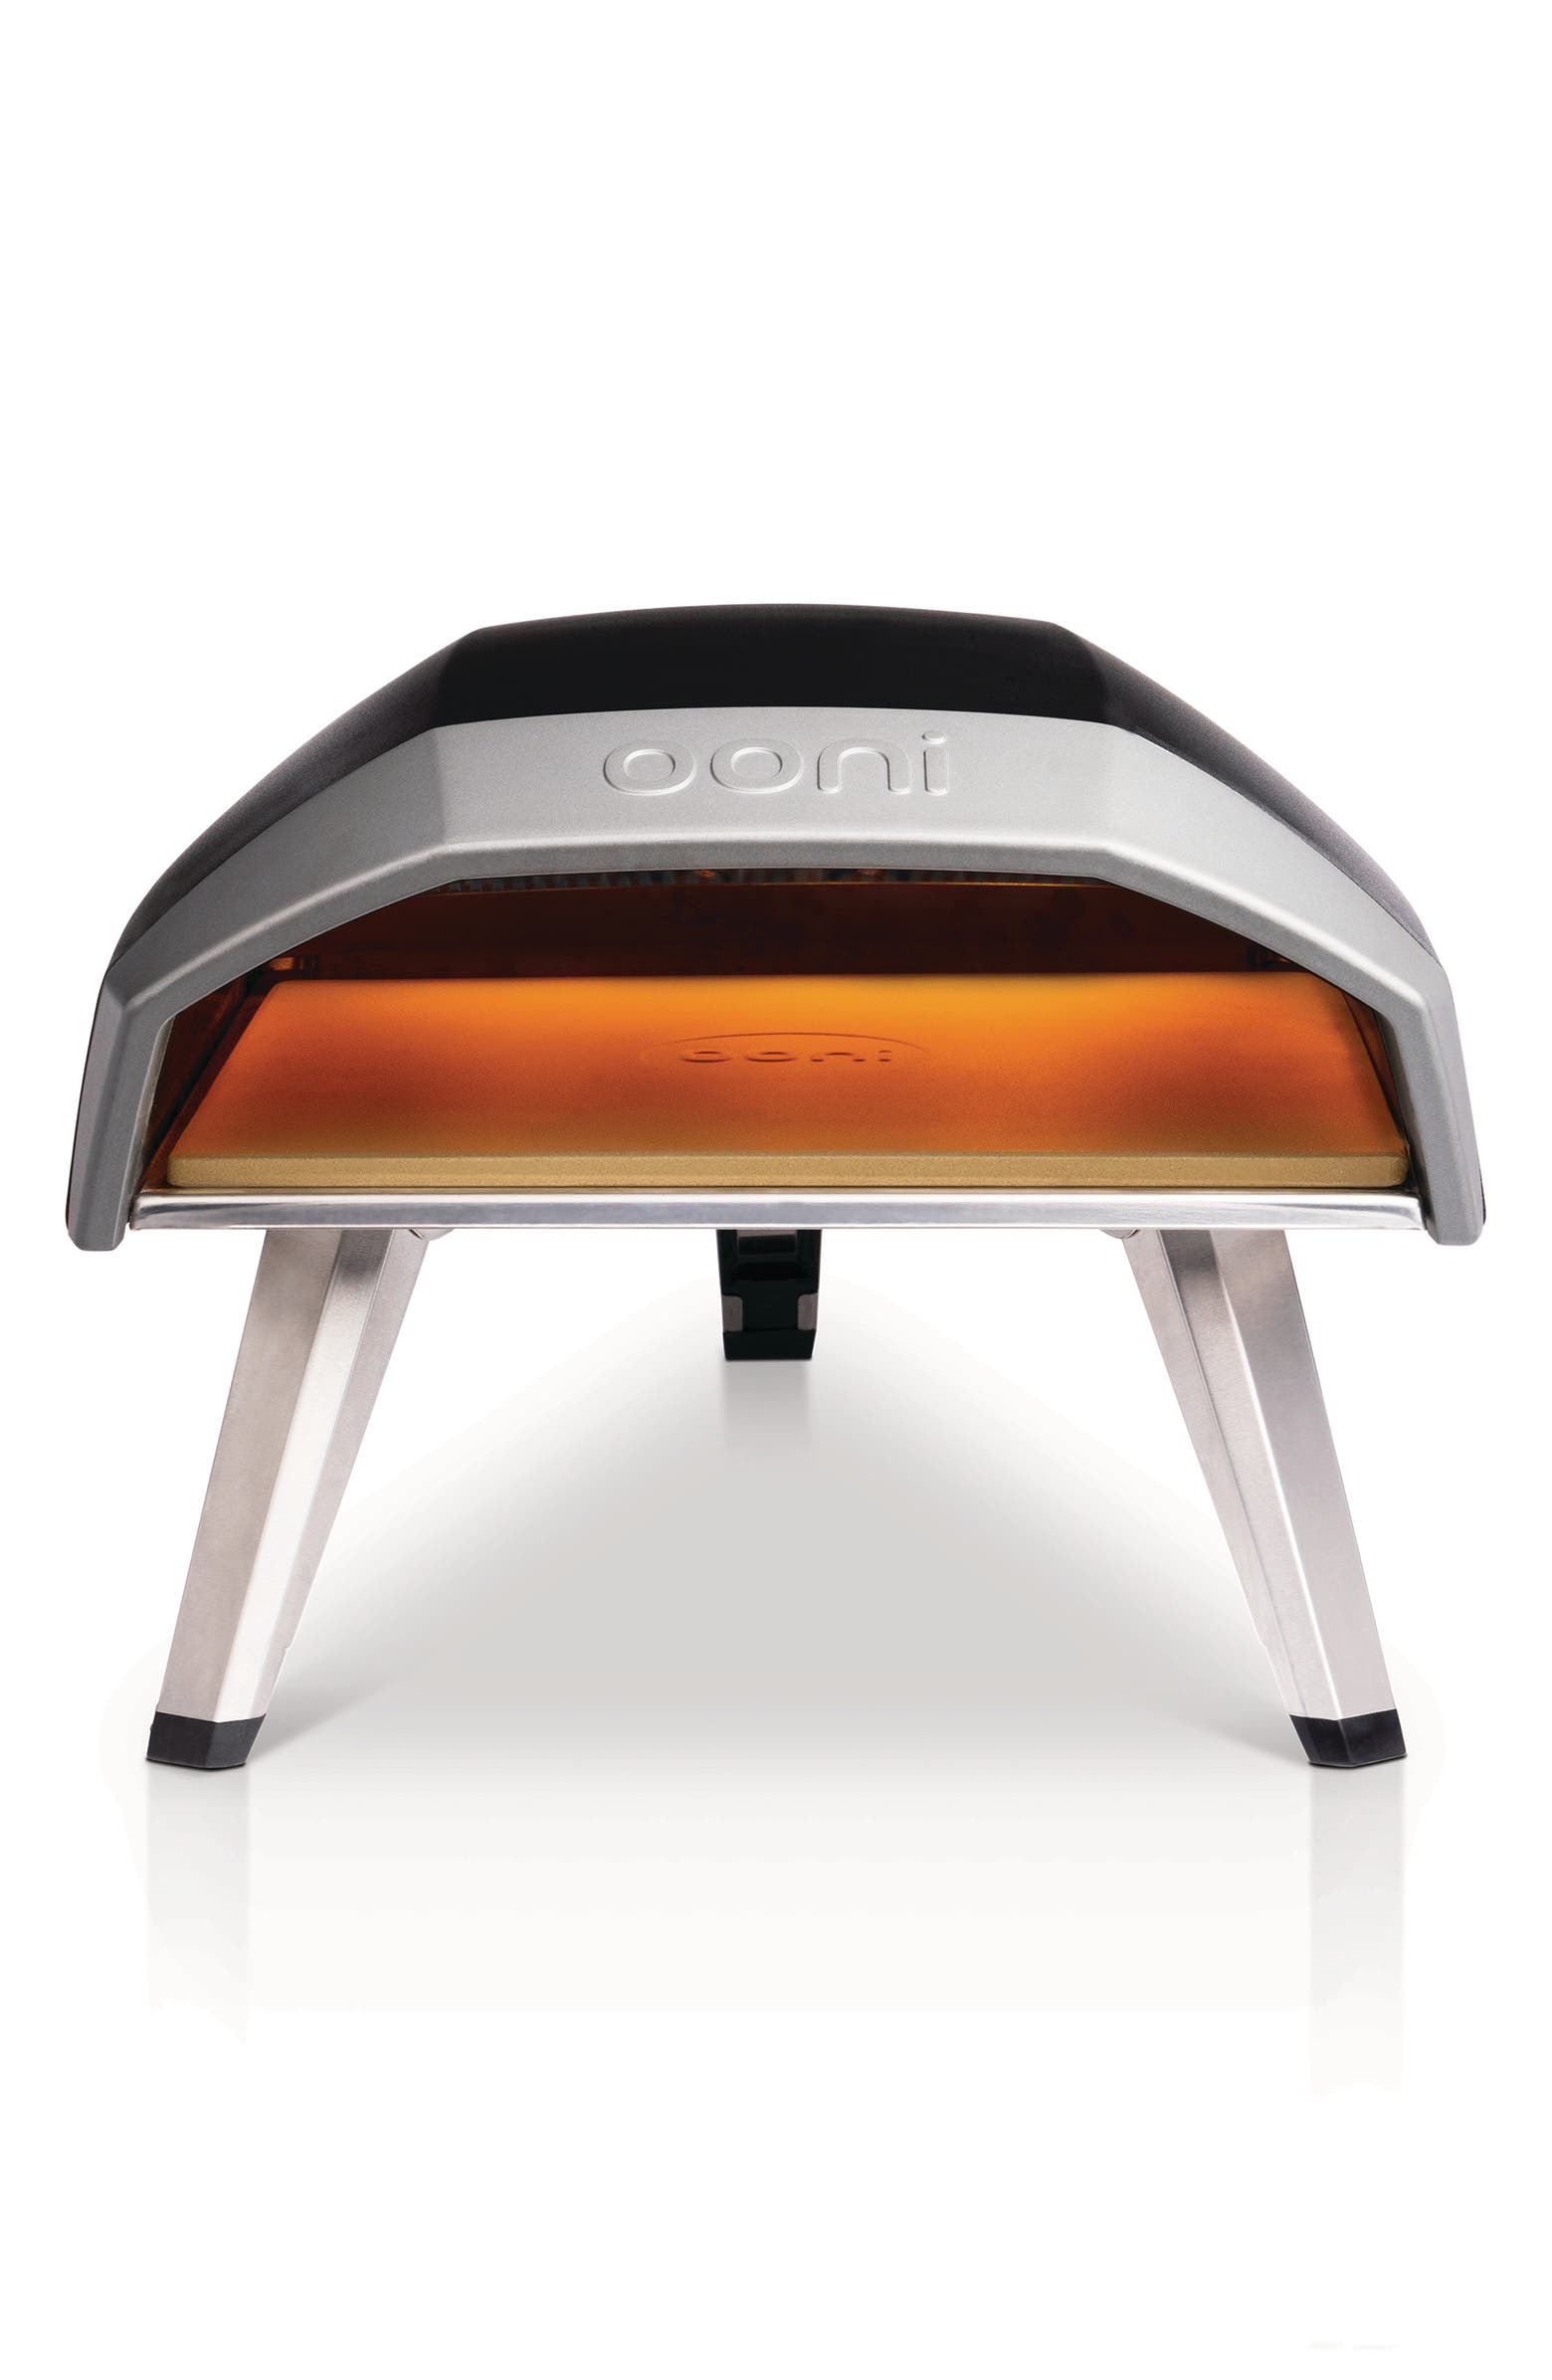 Ooni Koda 12 Portable Gas Powered Pizza Oven (Up to 12" Pizza) $319 + Free Shipping